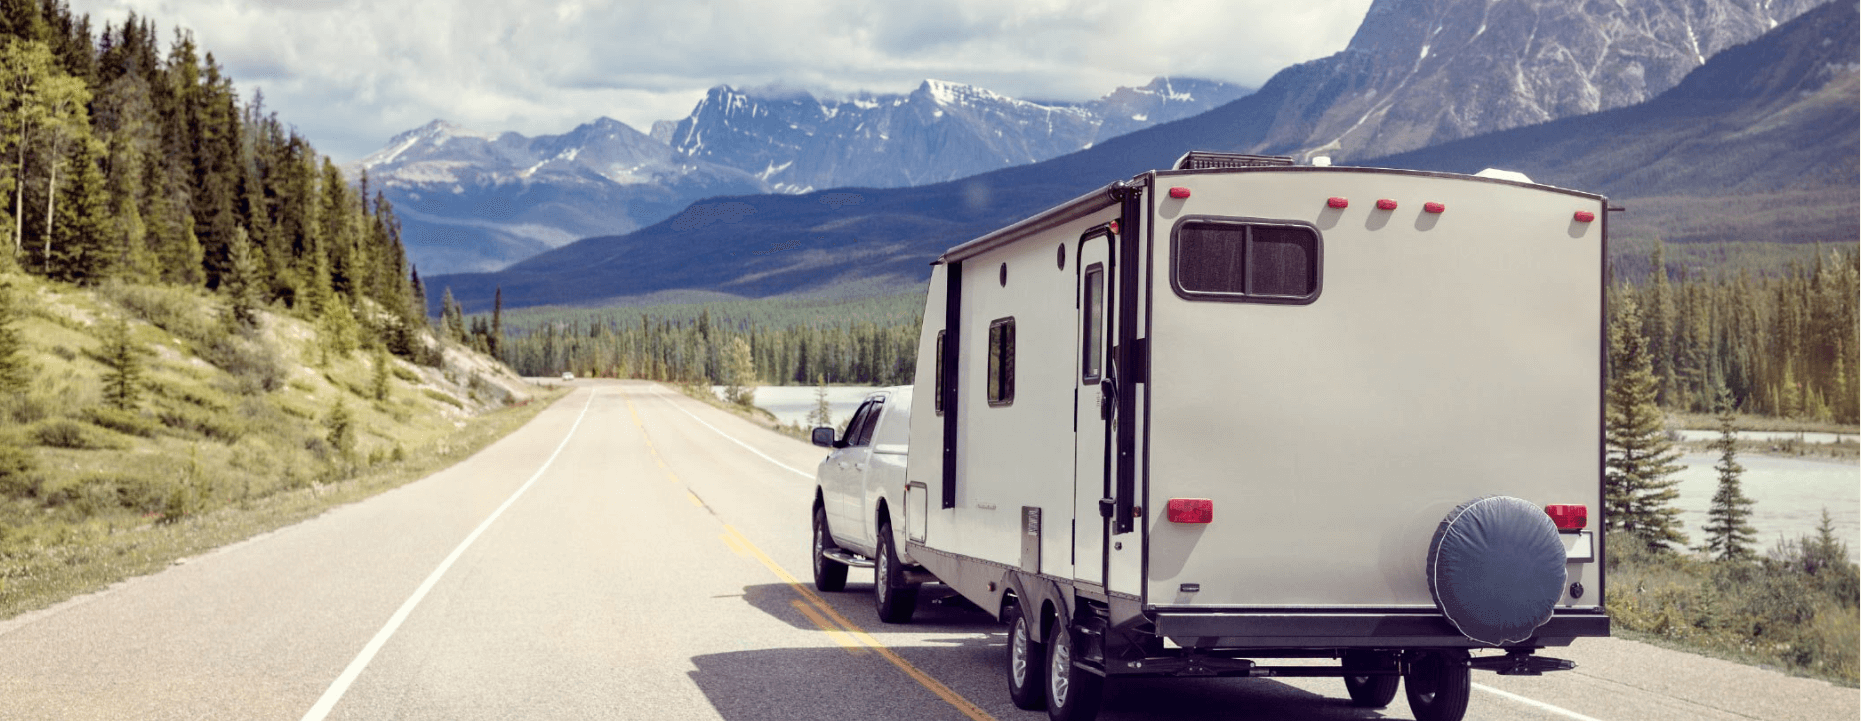 Fireweed RV services